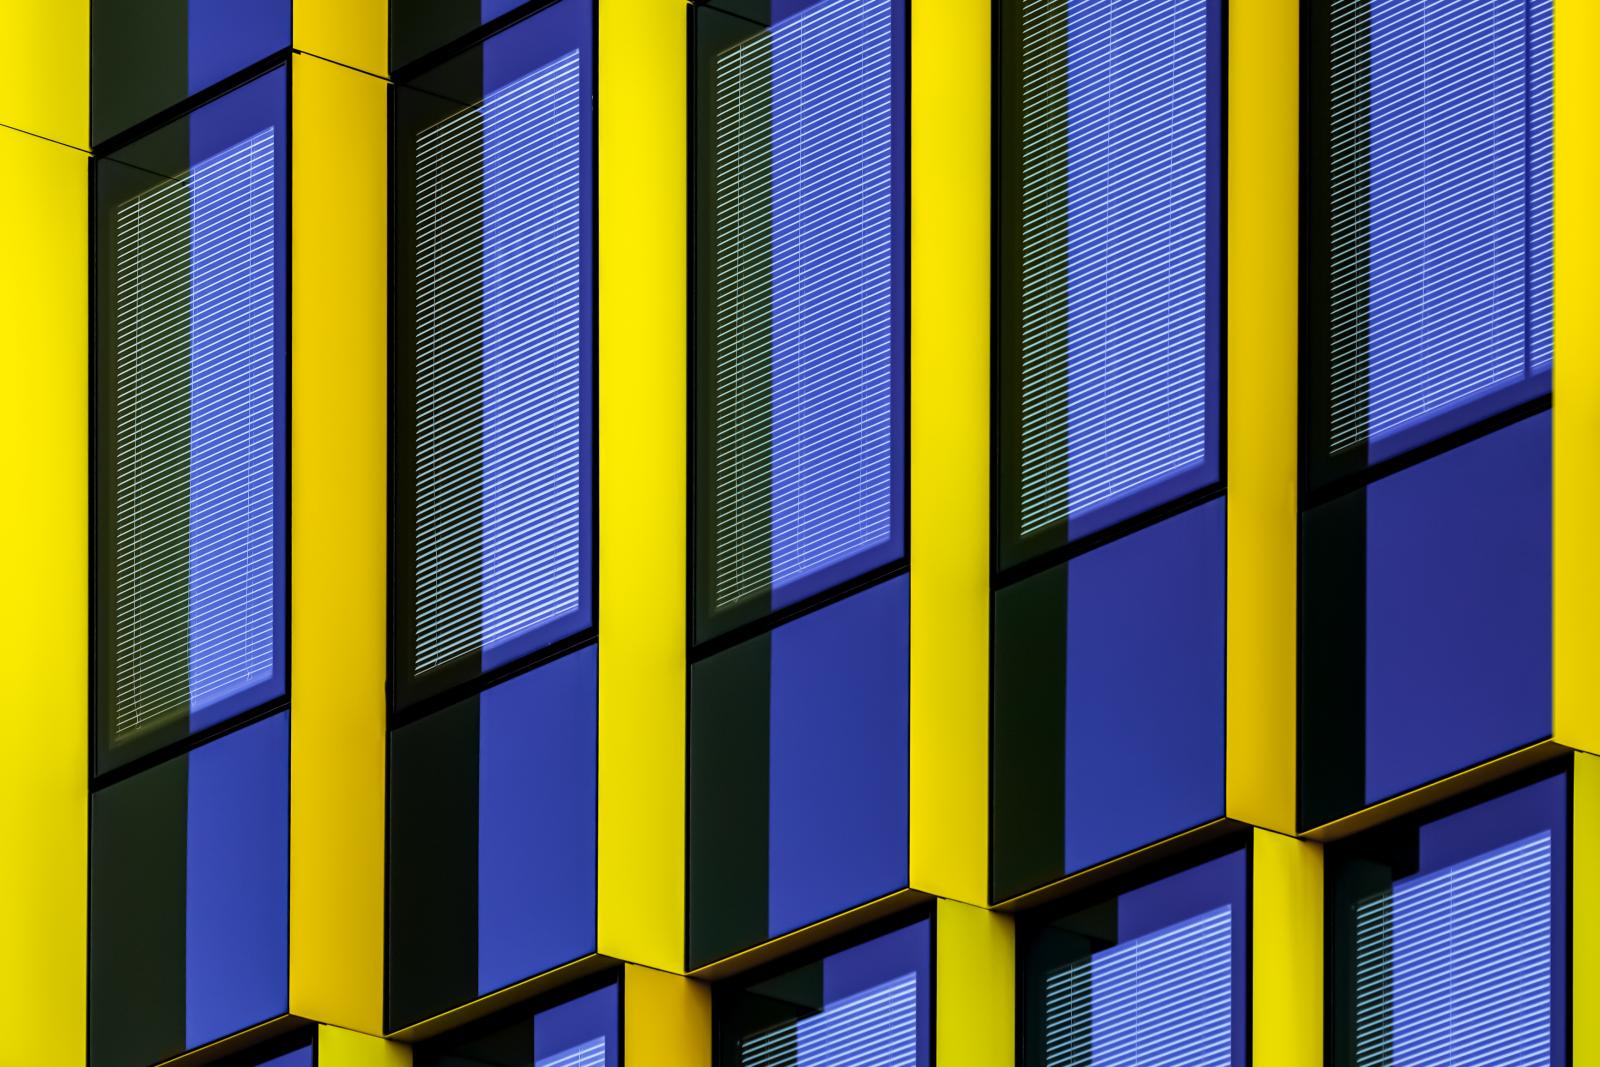 Image from New Photographs -  Munich, Germany  # 4156 2/2023 Modern Facade Elegance:...